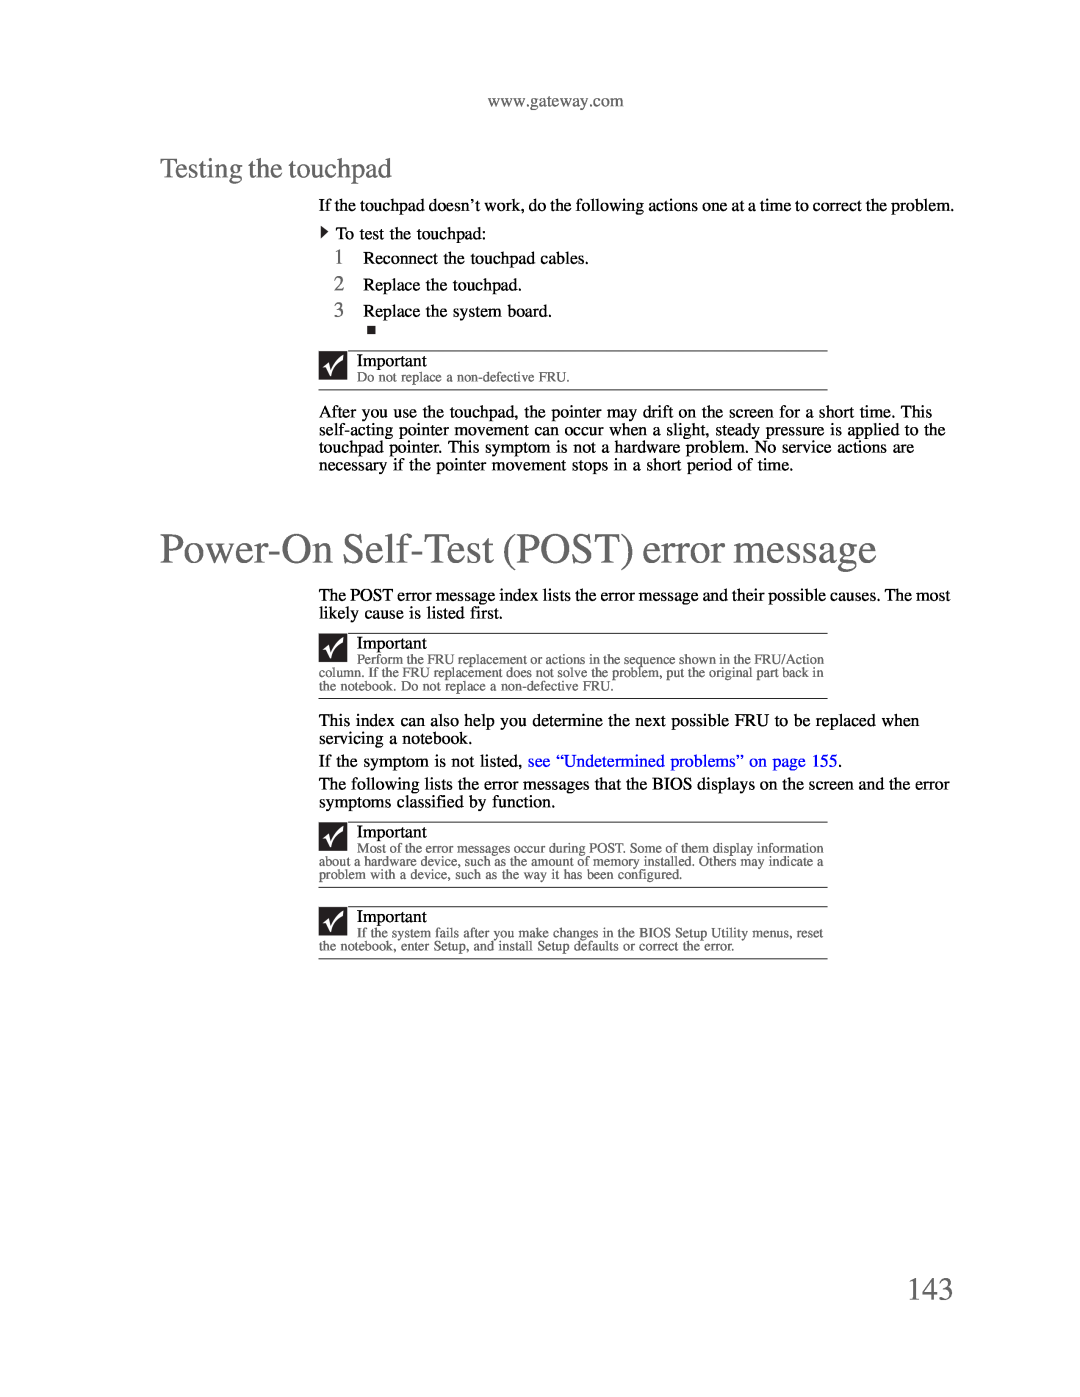 Gateway p-79 manual Power-On Self-Test POST error message, Testing the touchpad 